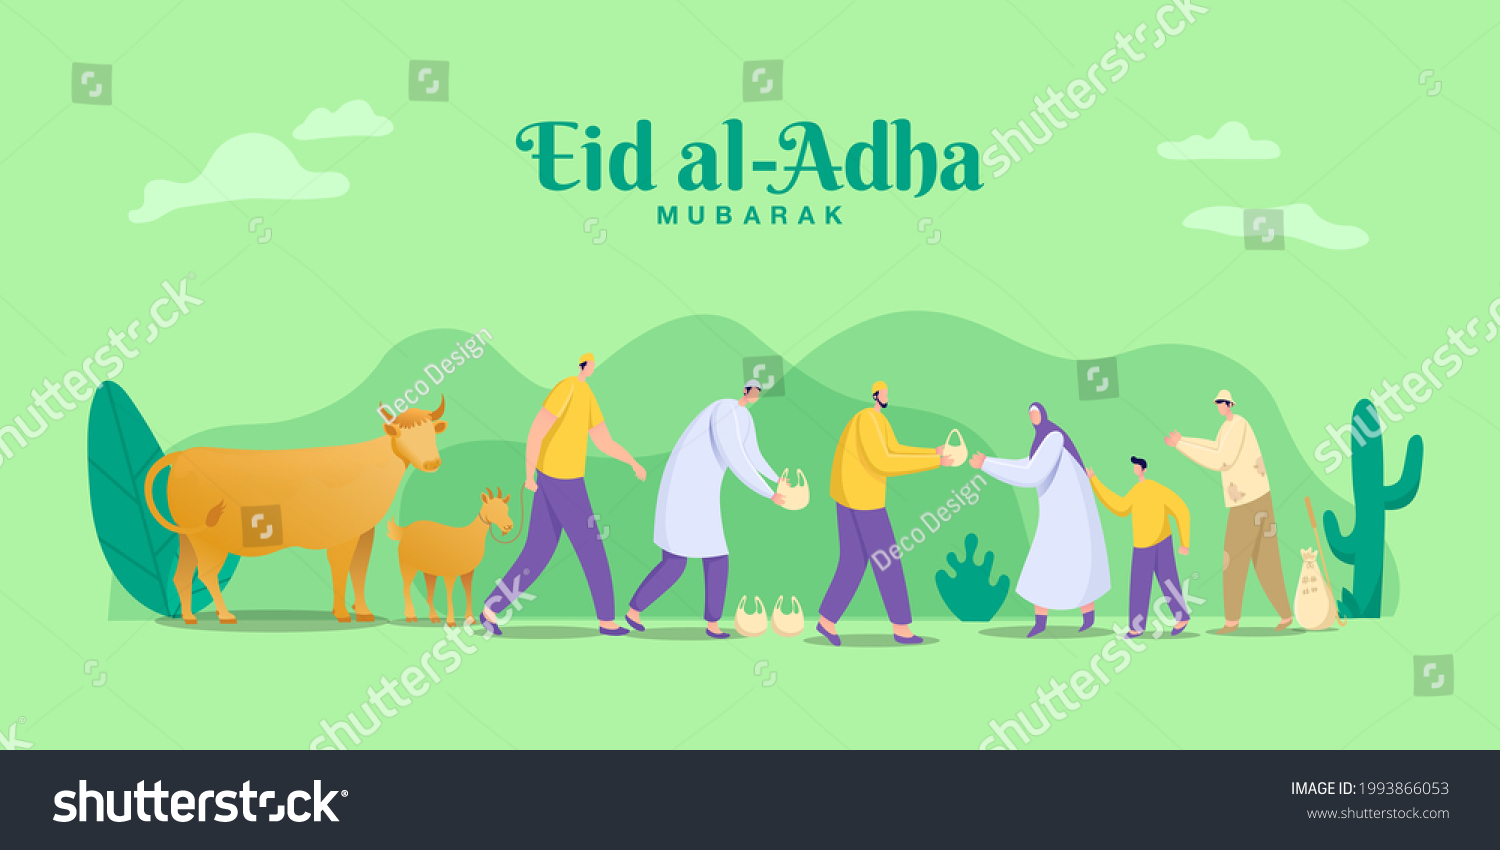 SVG of Eid al Adha mubarak greeting concept. illustration of sharing the meat of the sacrificial animal that has been cut svg